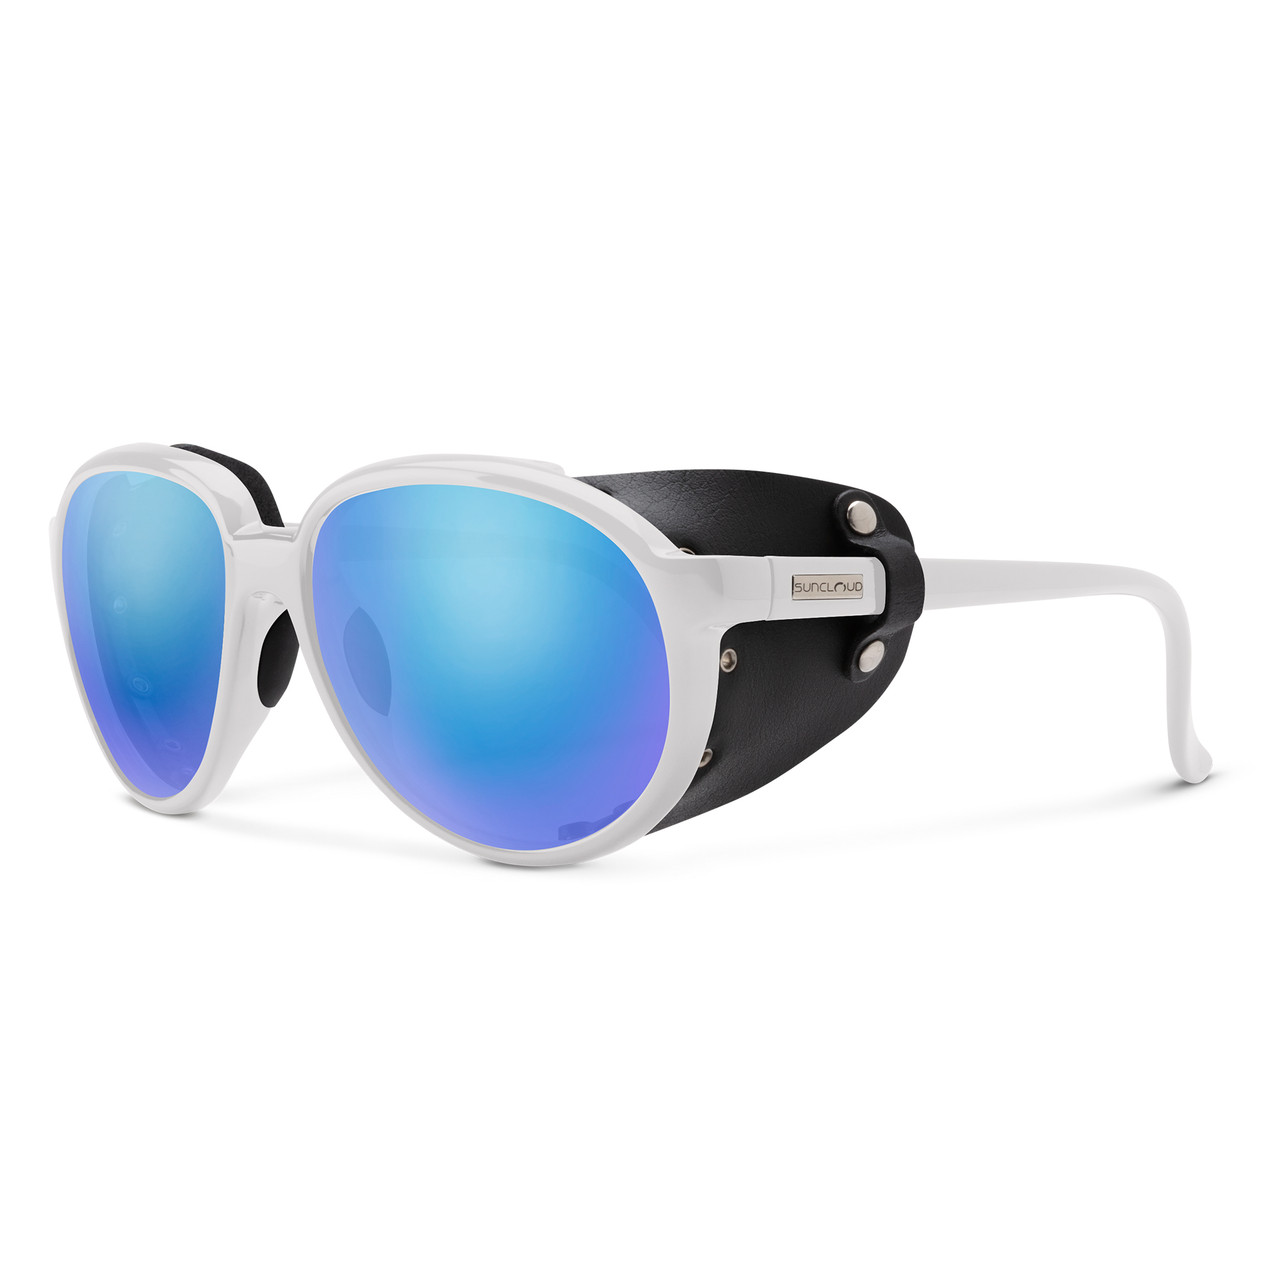 Profile View of Suncloud Glacier Mountain Climbing Hiking Style Polarized Sunglasses Unisex Acetate Round Syn. Leather Side Shield in White with Polar Blue Mirror